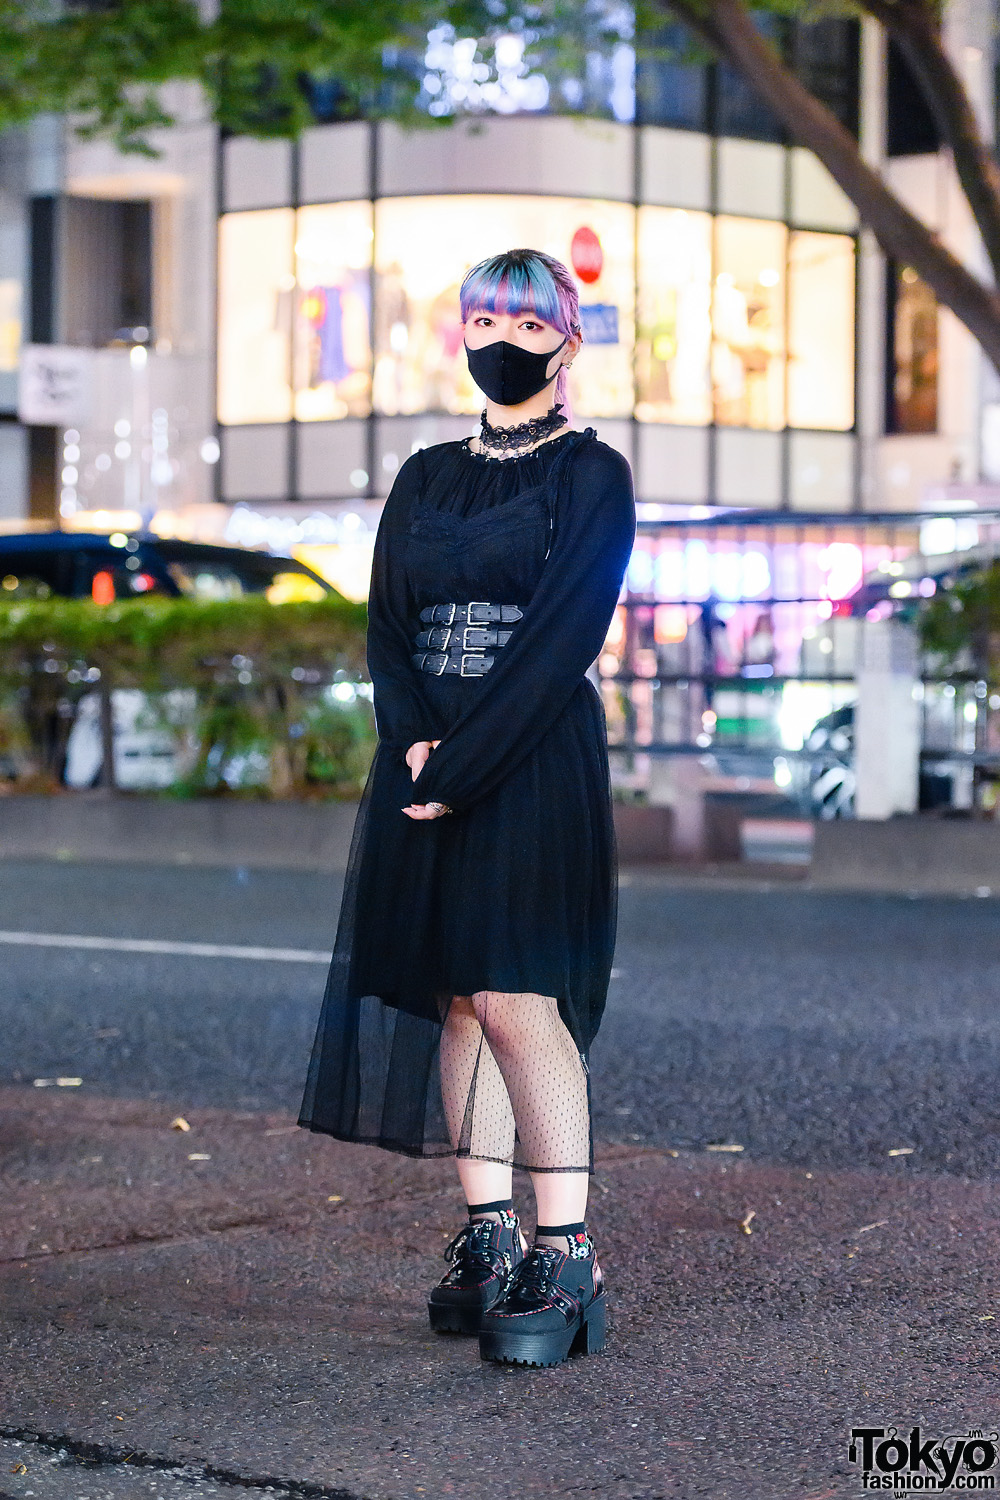 All Black Tokyo Style w/ Unicorn Ponytail, Lace Choker, Sheer Lingerie  Dress Over Gypsy Dress, Corset Belt, Coach, OZZ, Mishka Backpack & Ankle  Boots – Tokyo Fashion